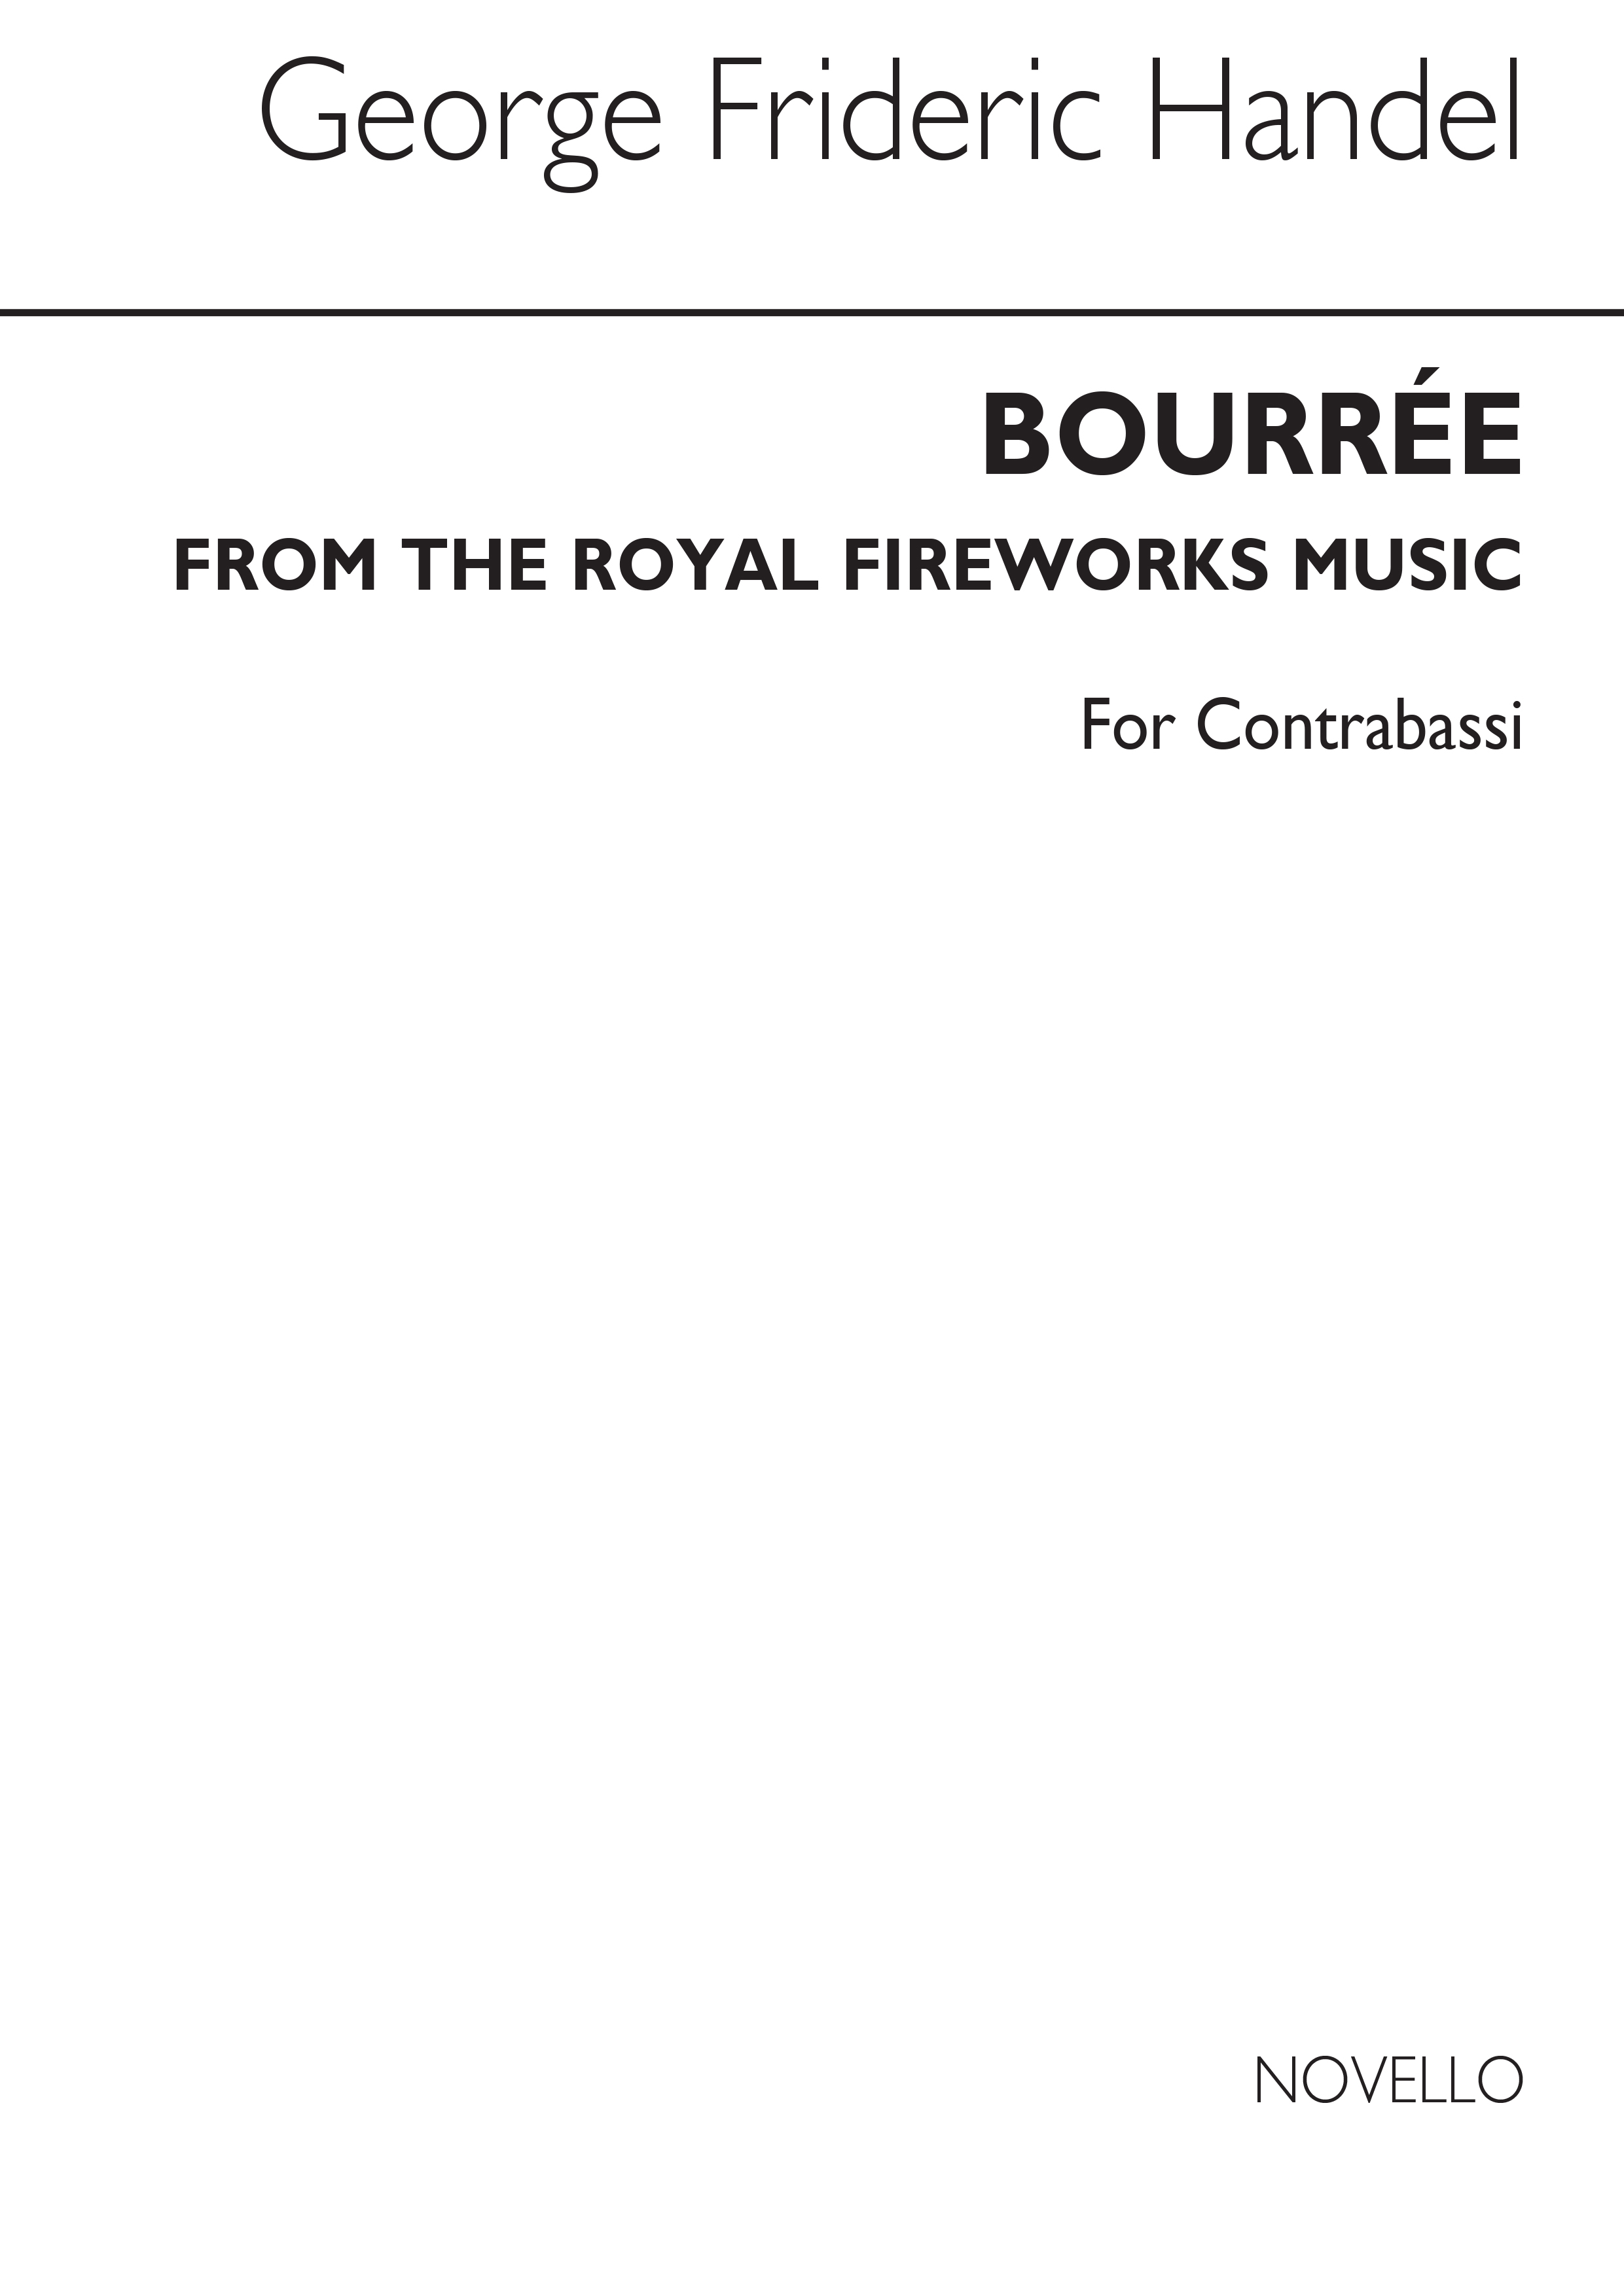 George Frideric Handel: Bourree From The Fireworks Music (Db)